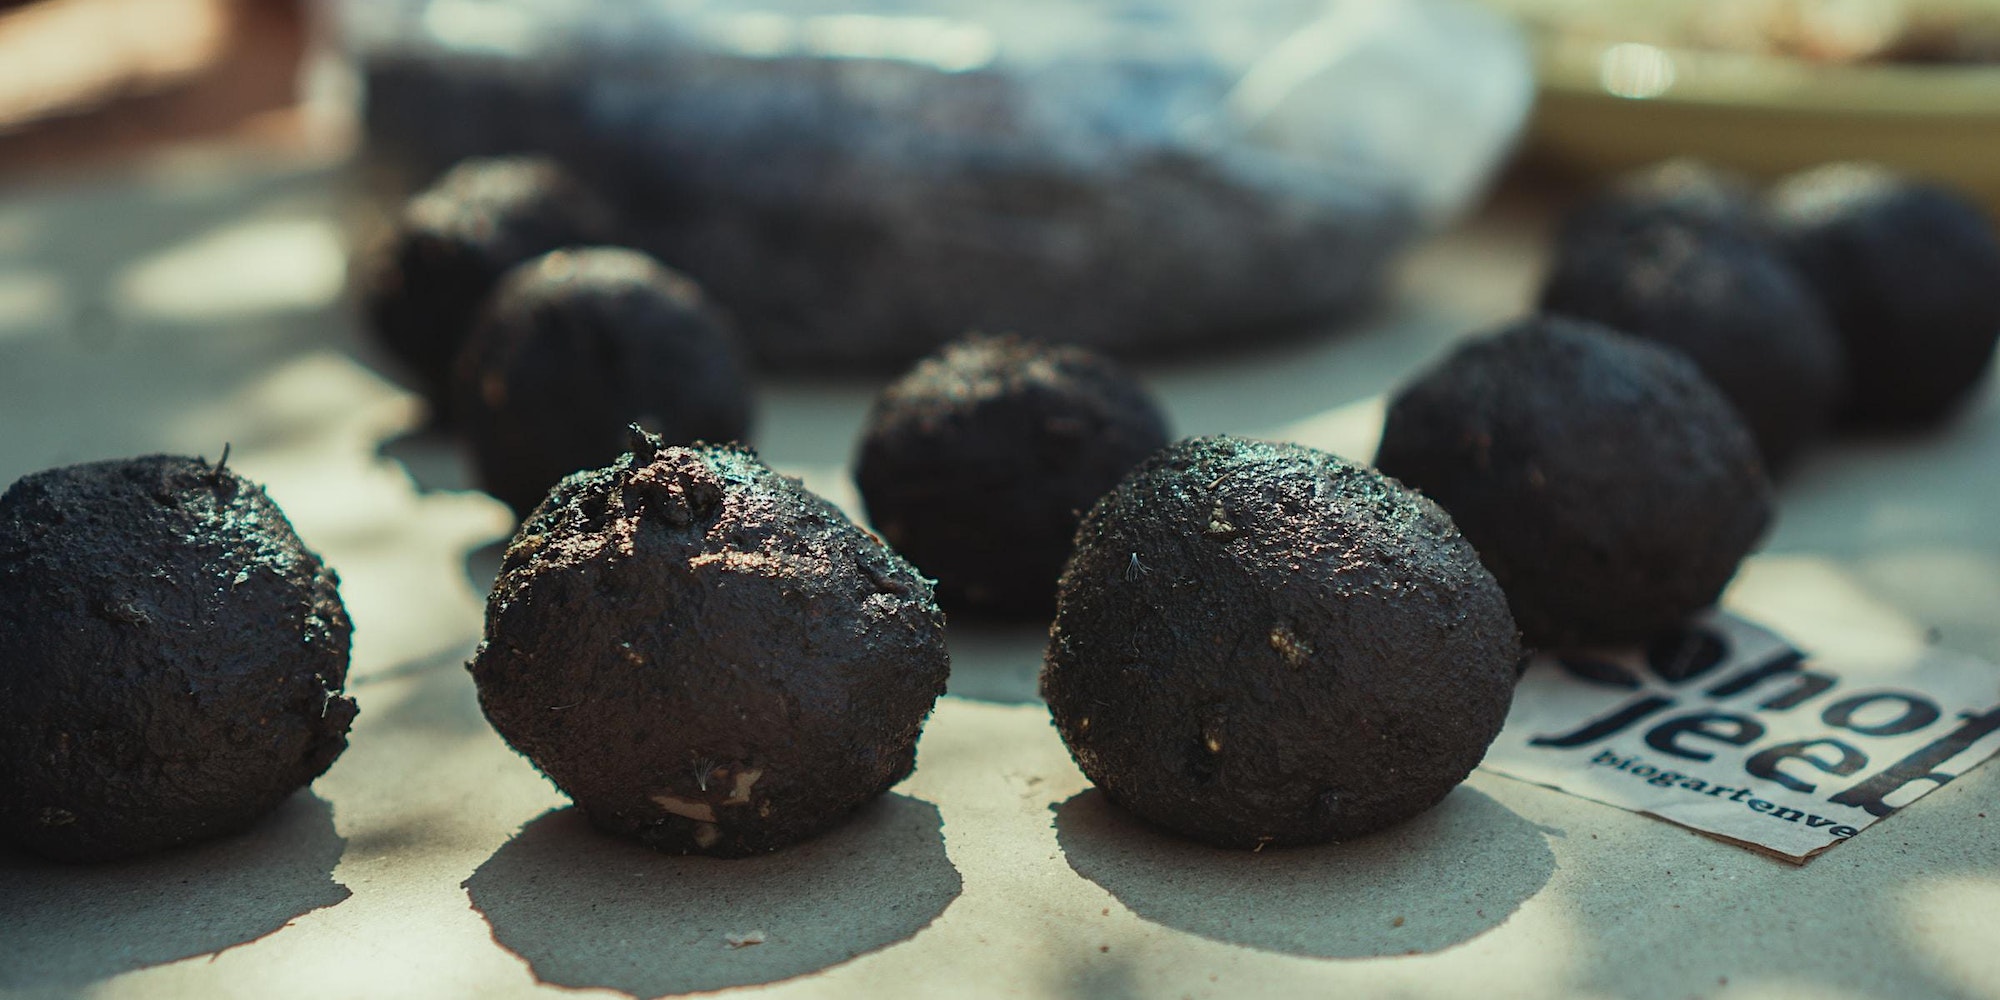 Picture of balls of dirt on a table.